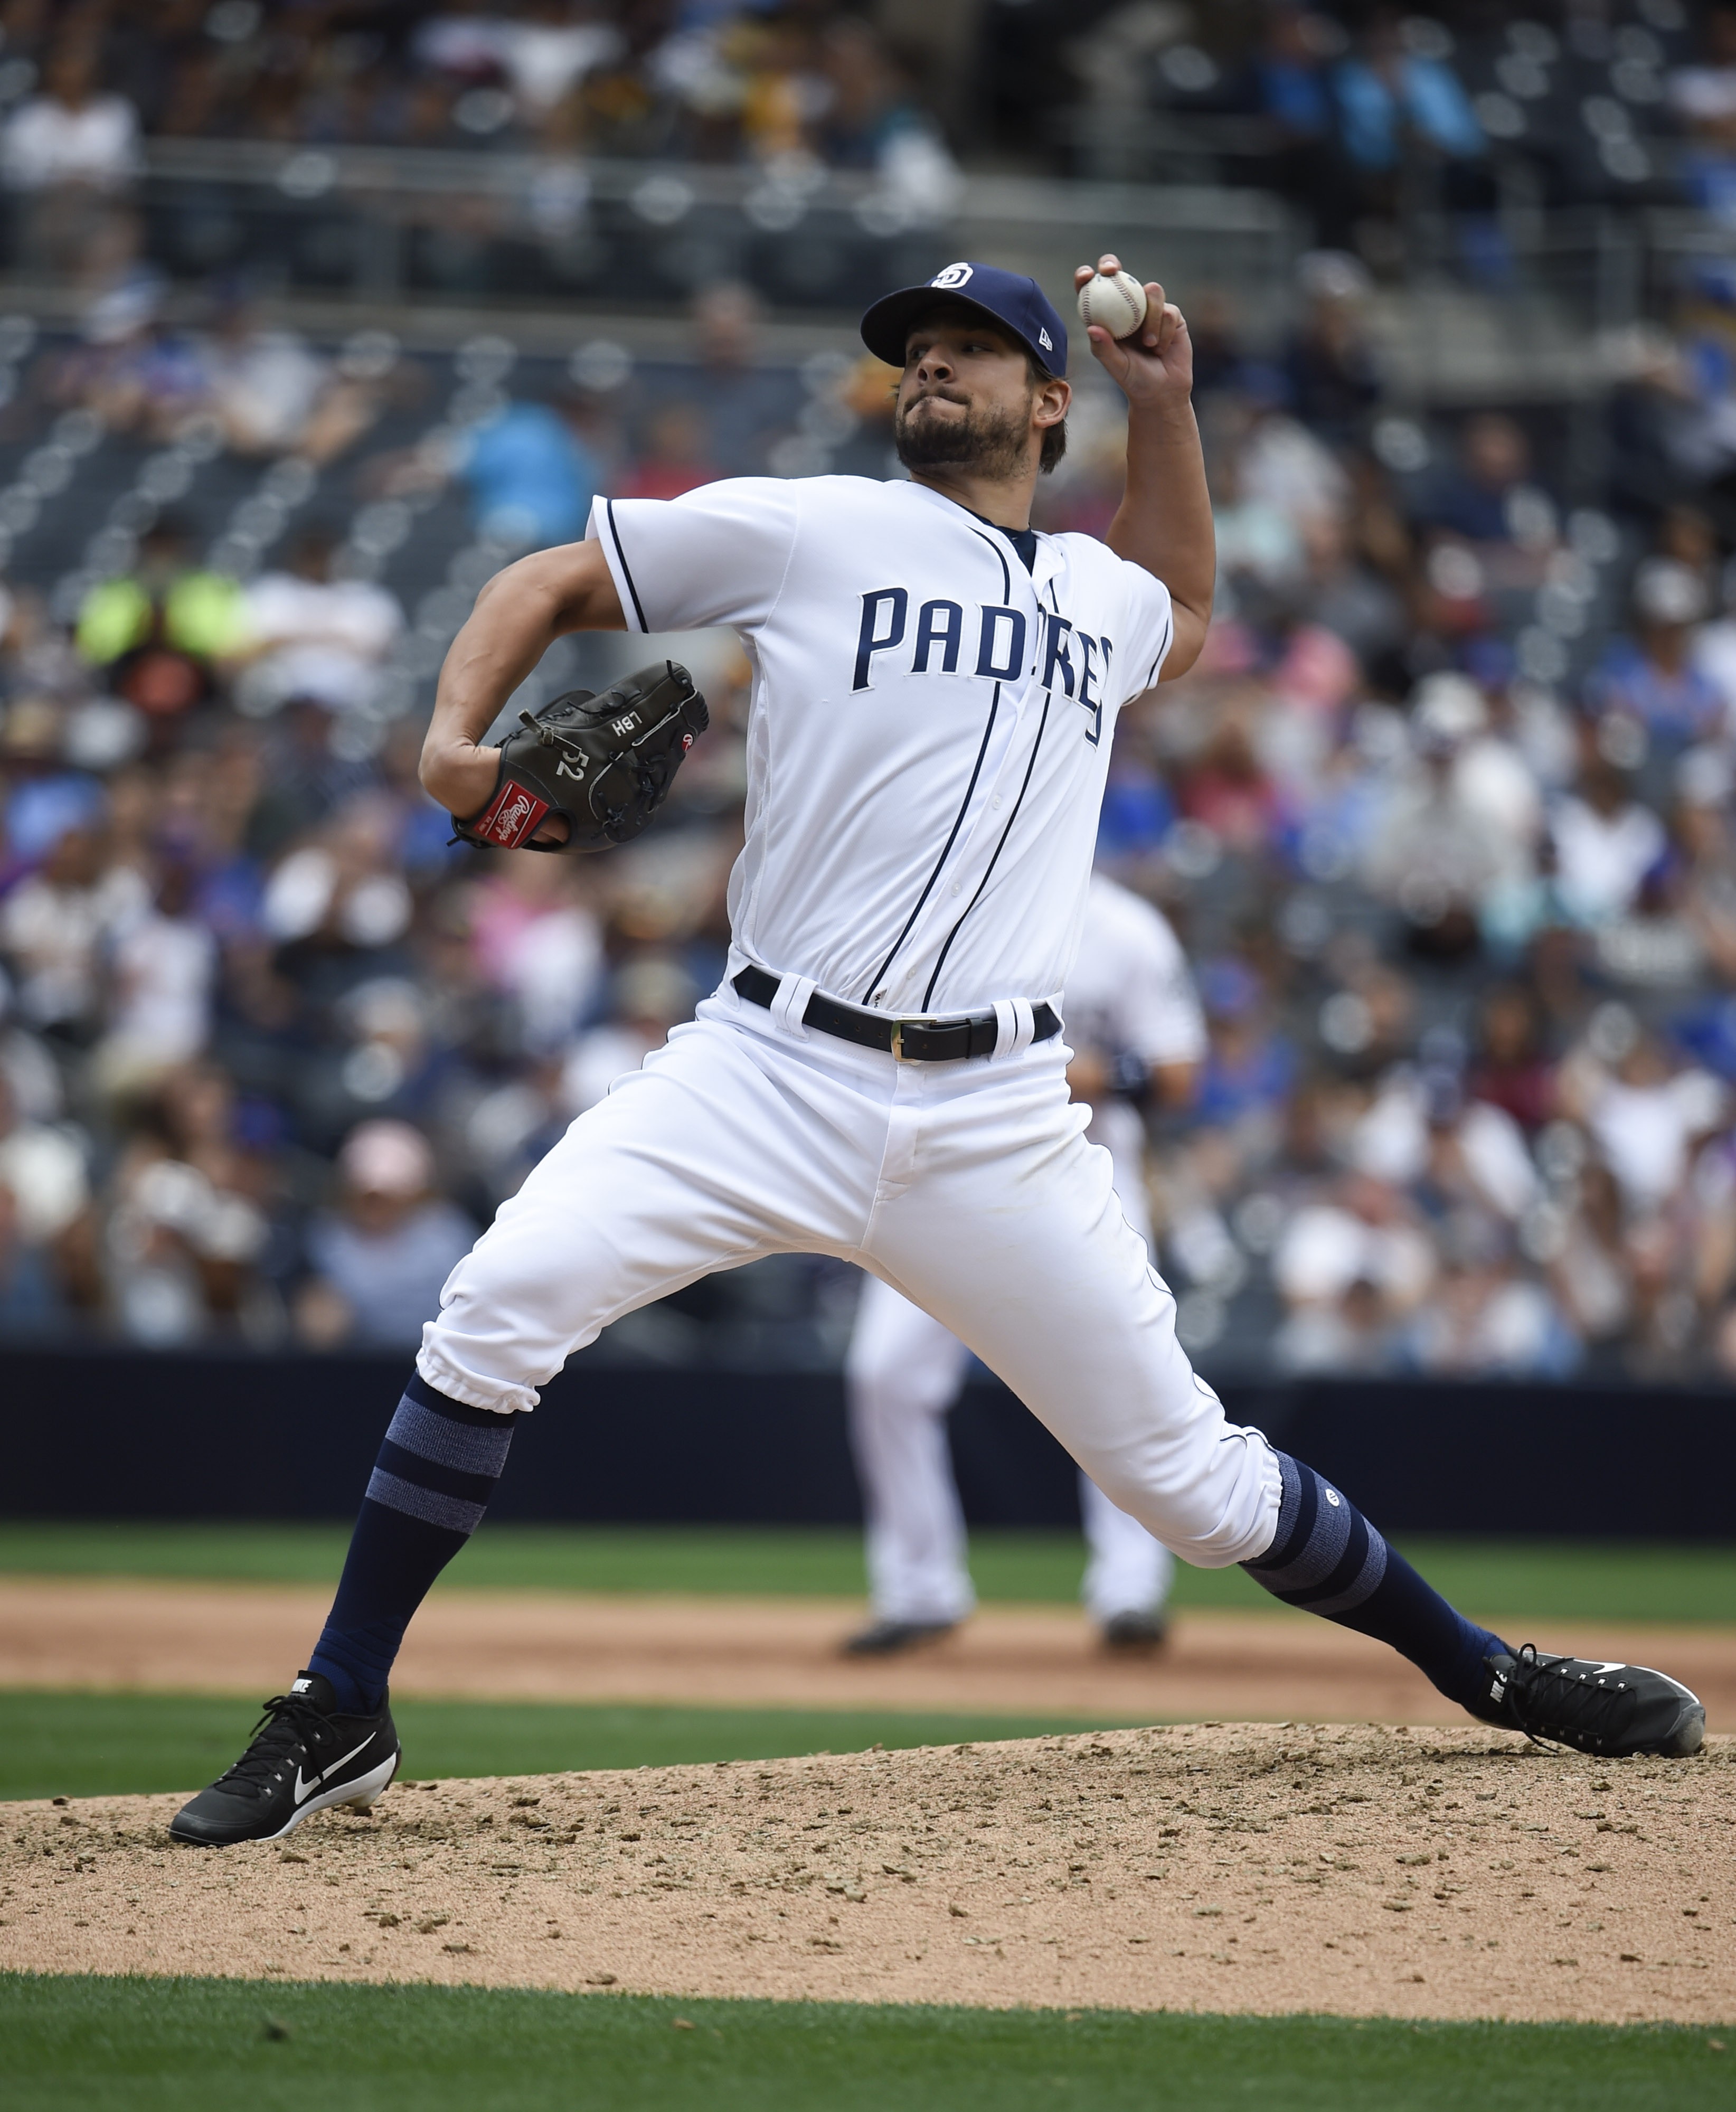 Red Sox potential trade target Padres reliever Brad Hand